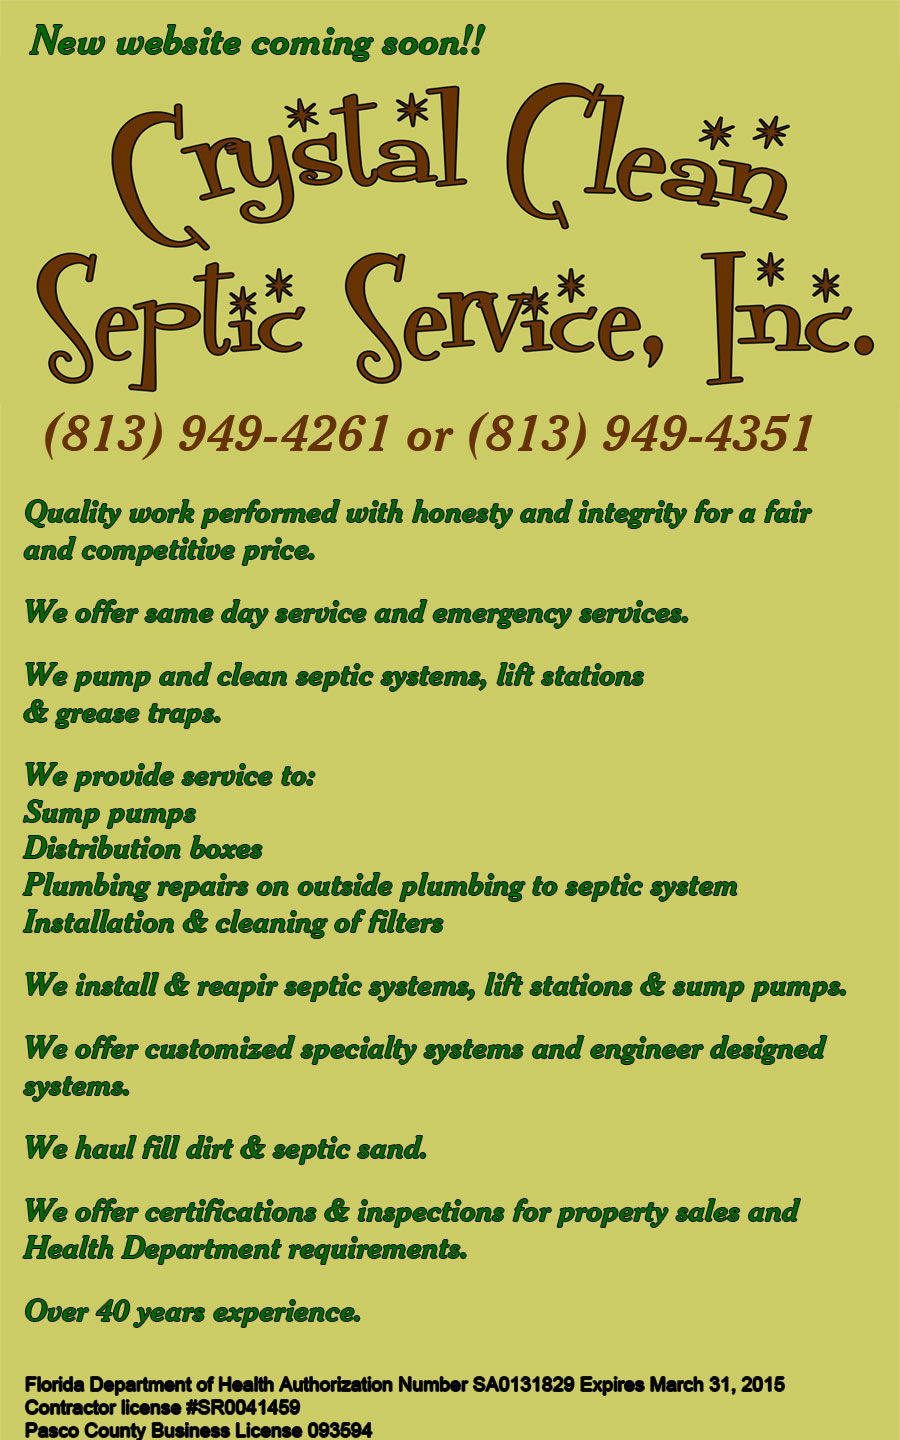 Crystal Clean Septic Service, Inc